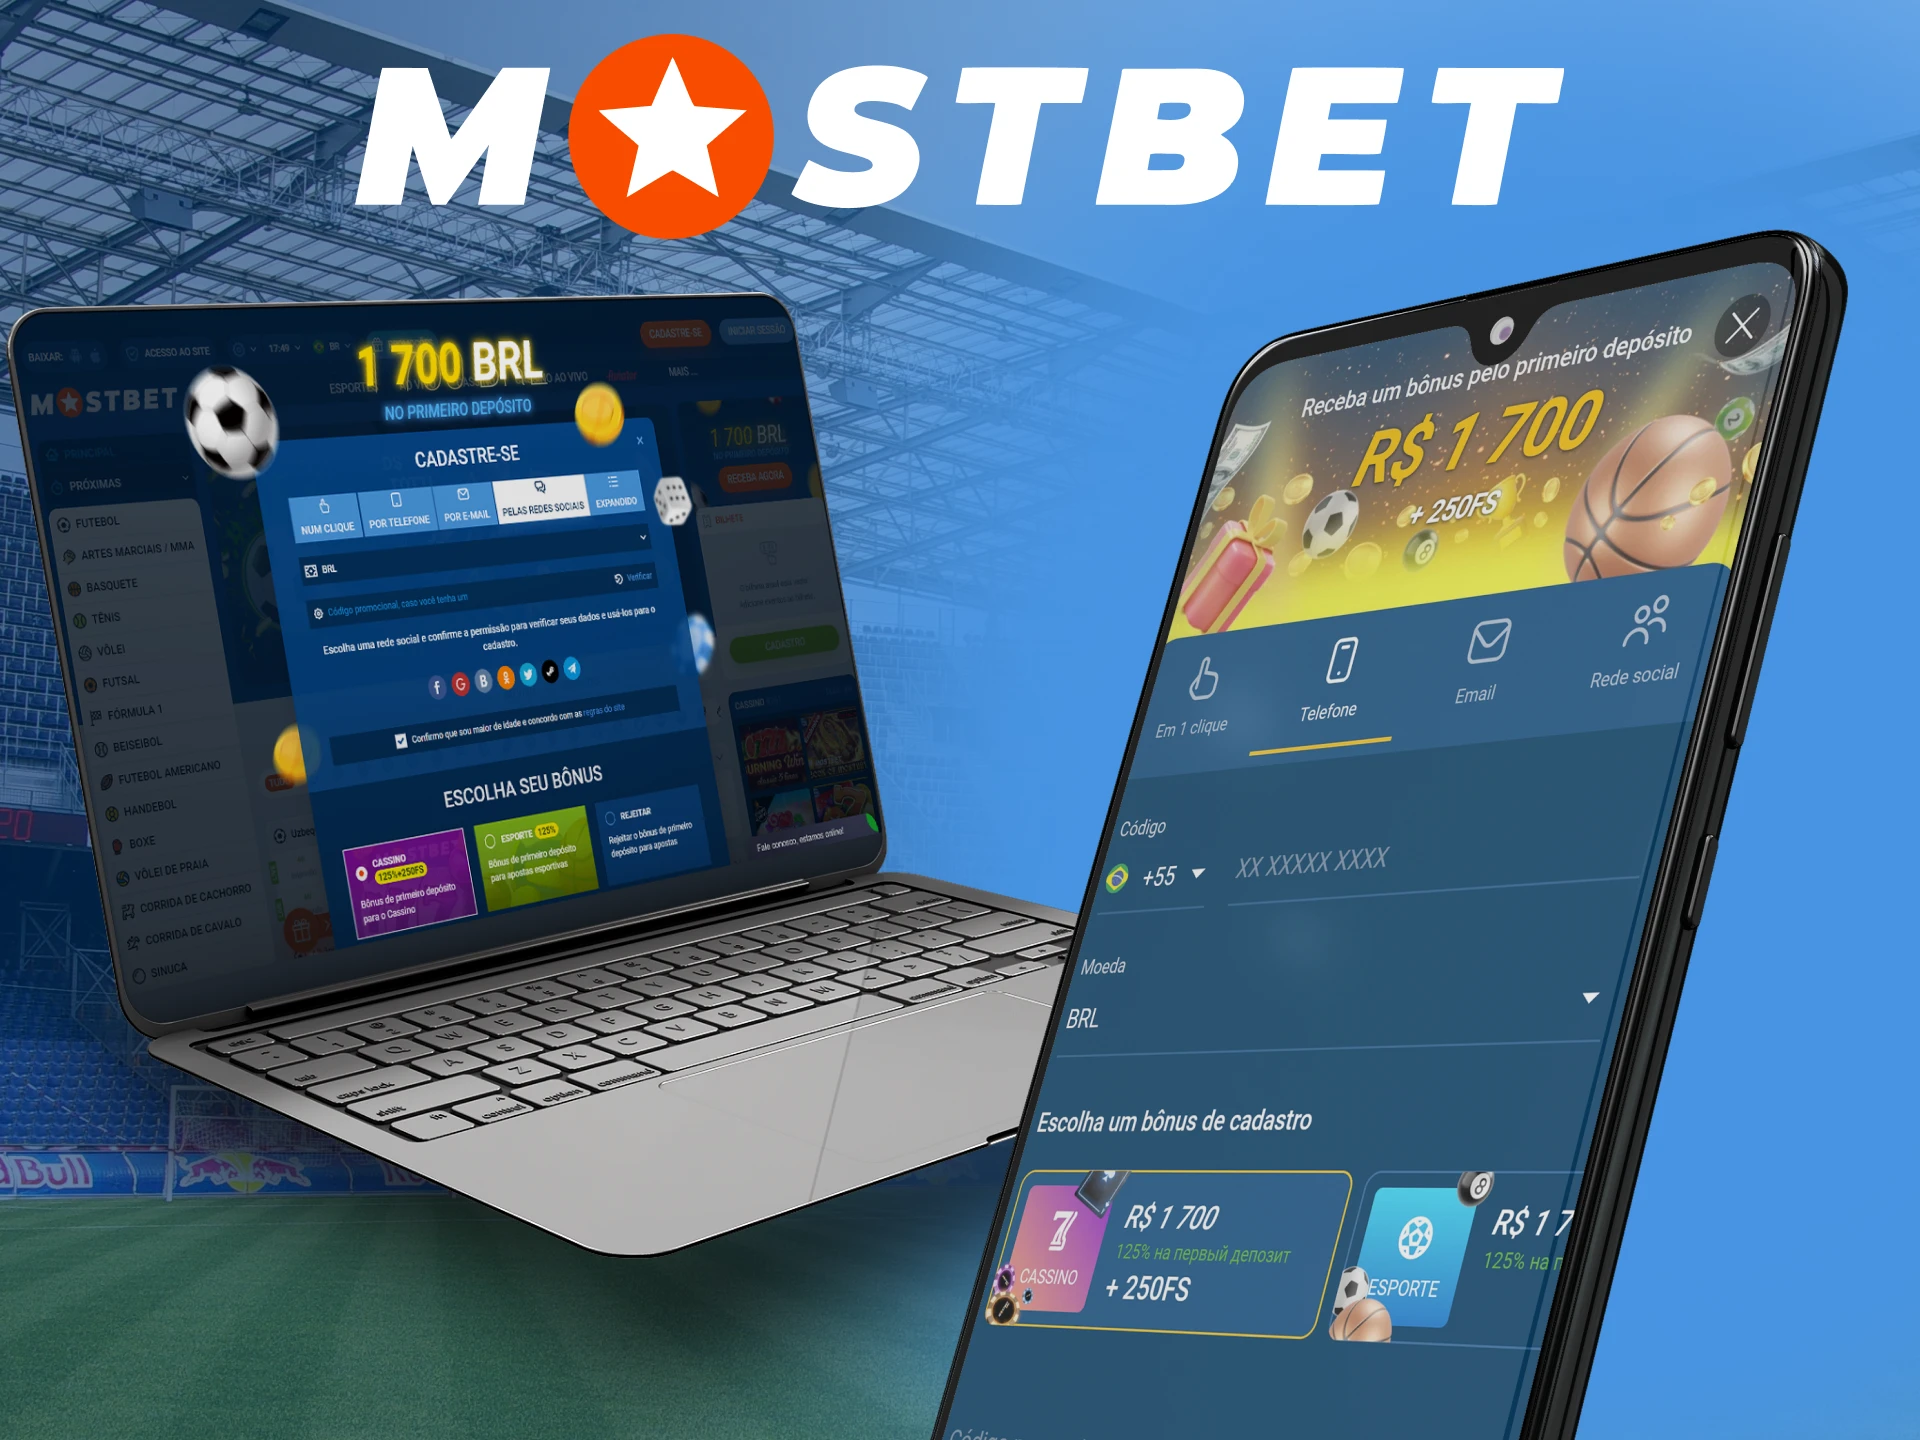 If you are from Brazil, find out how to register with Mostbet.